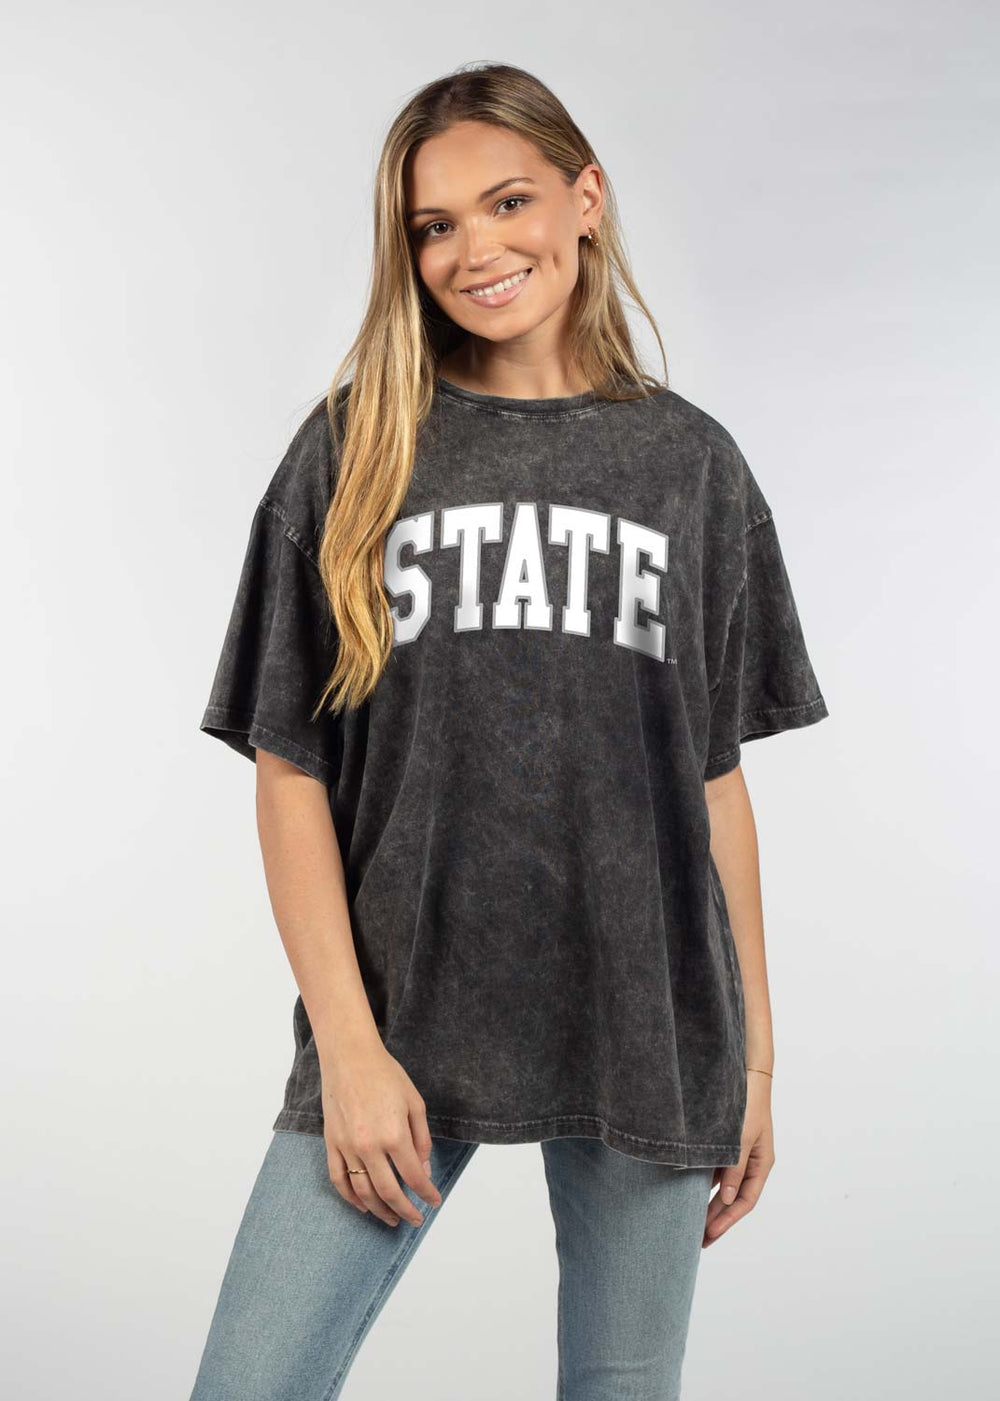 Chicka-d MS State Band Tee Graphite